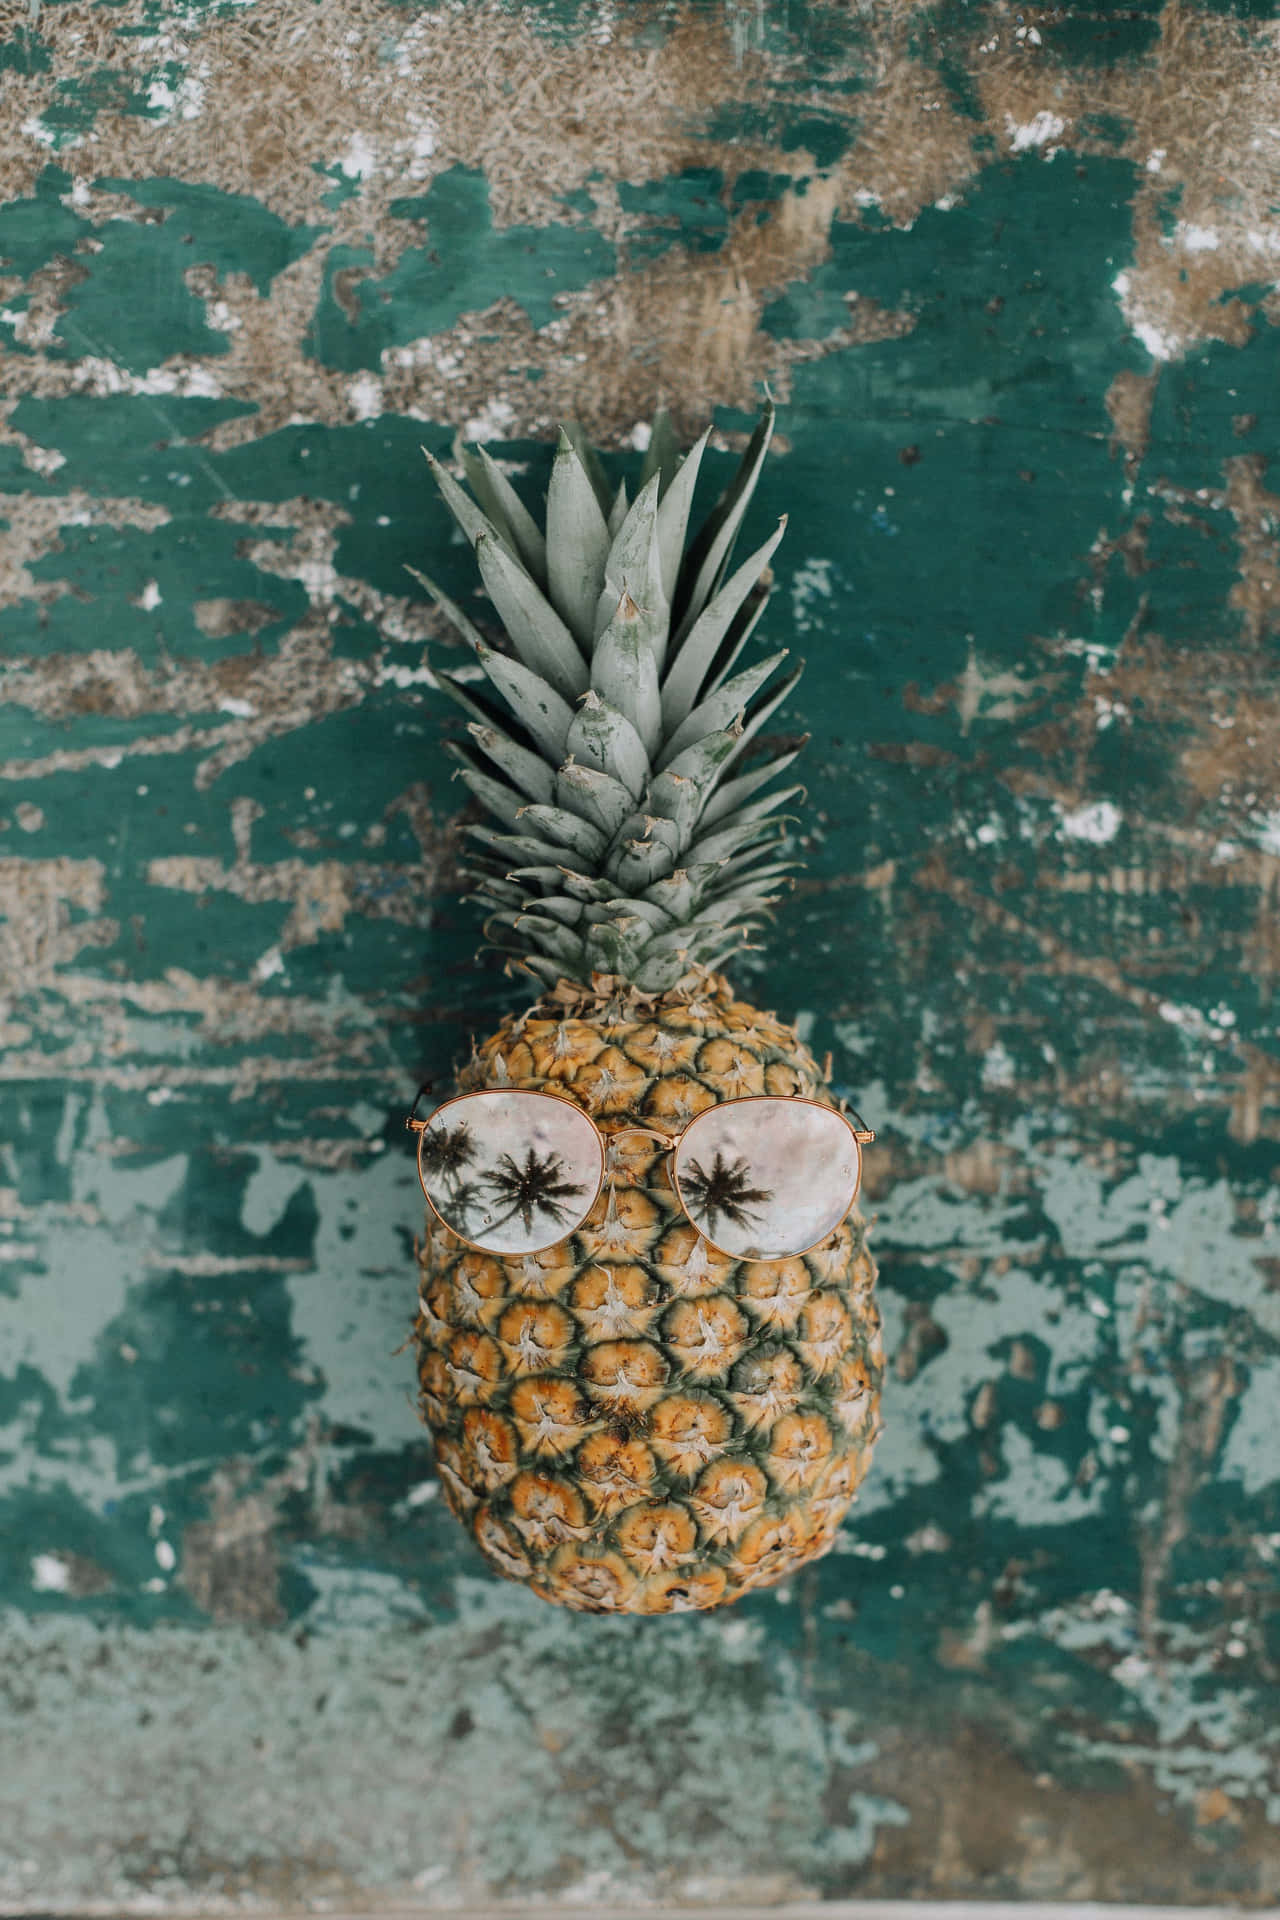 Pineapple water iPhone background tumblr cool  Summer wallpaper, Tumblr  wallpaper, Wallpaper